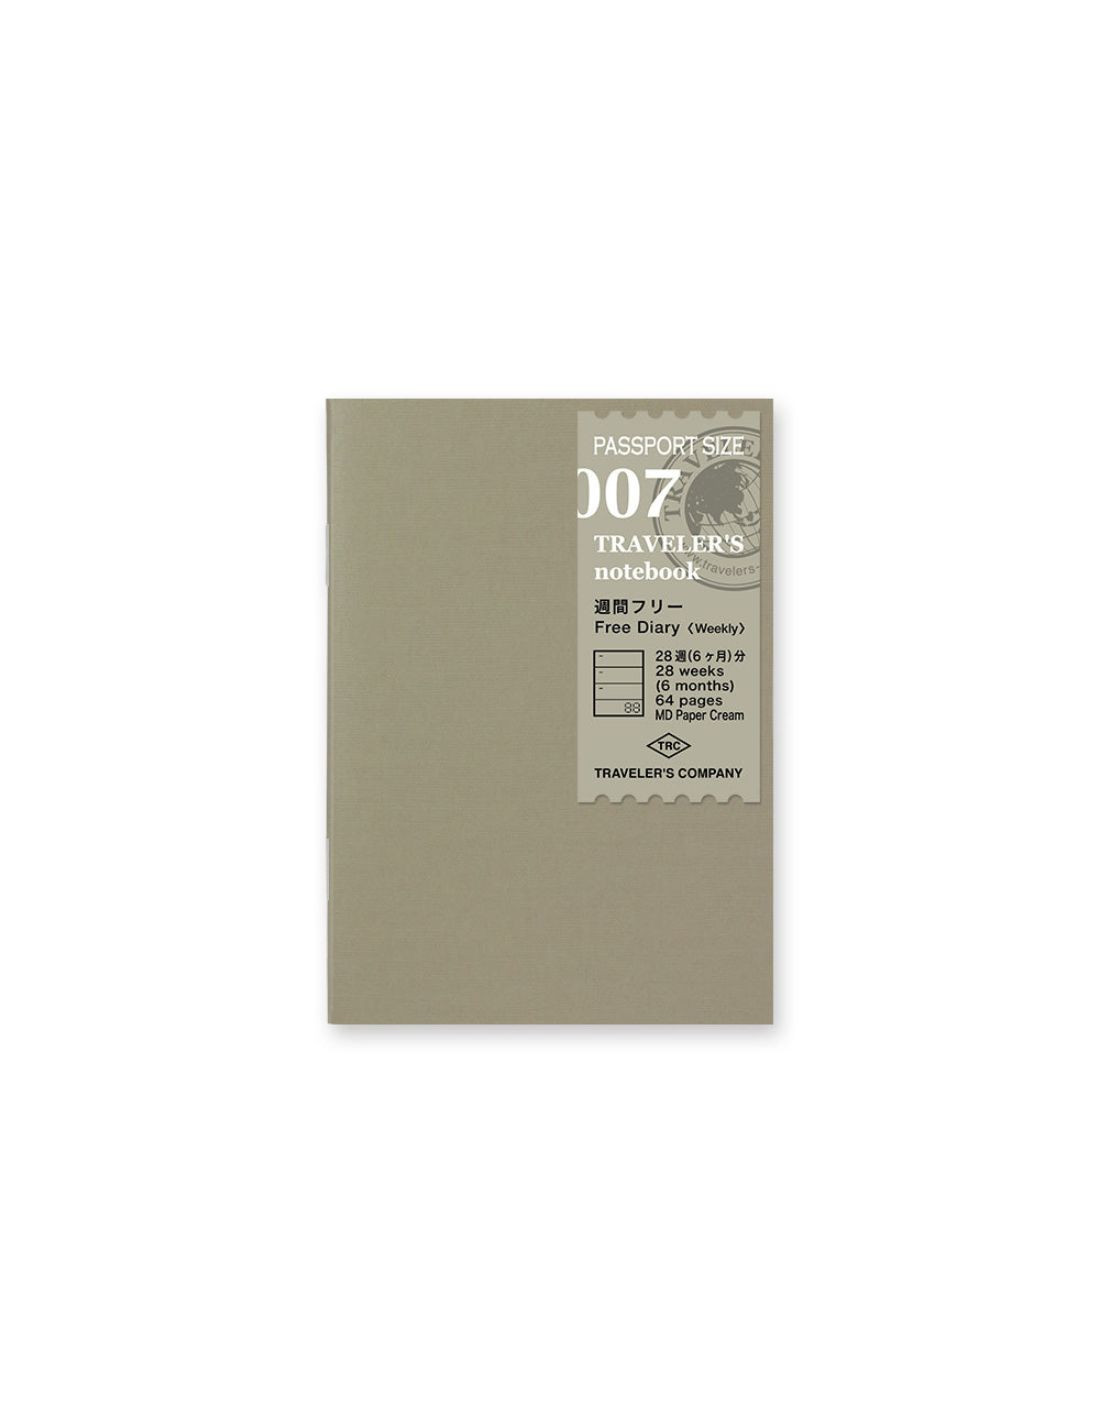 Refill 007 Free Diary [Weekly] - Passport size - TRAVELER'S notebook